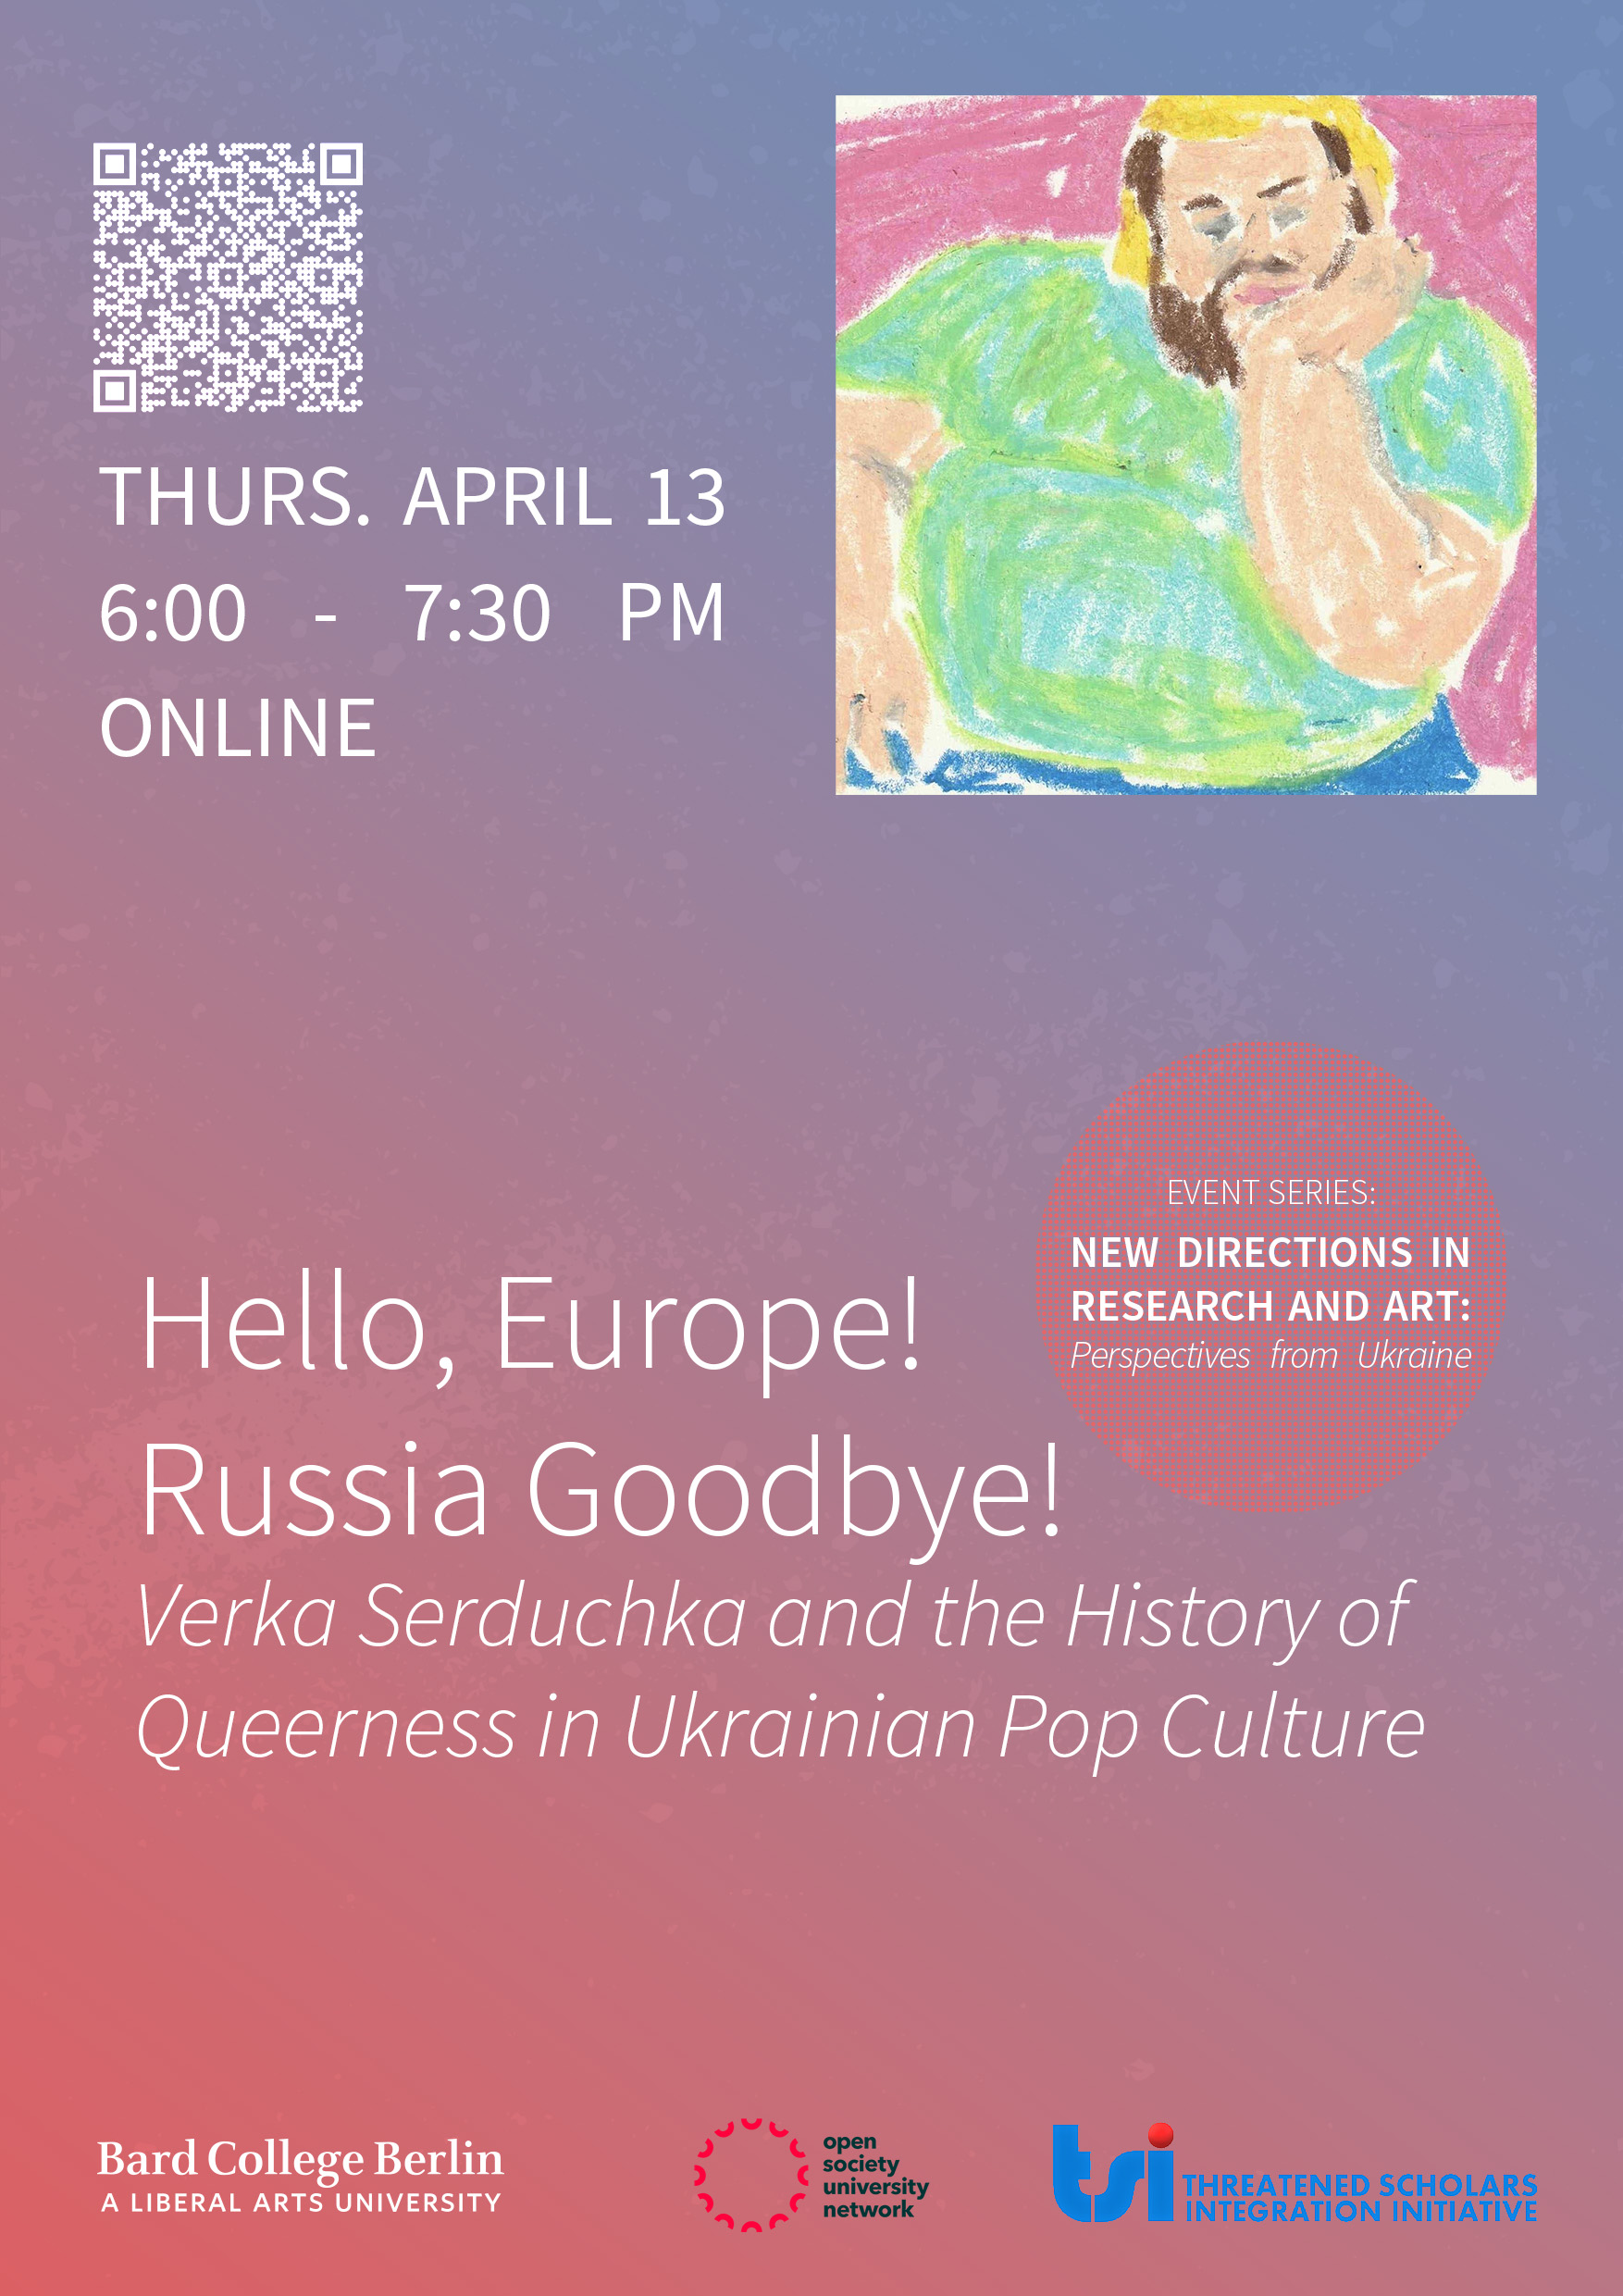 Hello, Europe! Russia Goodbye! Verka Serduchka and the History of Queerness in Ukrainian Pop Culture